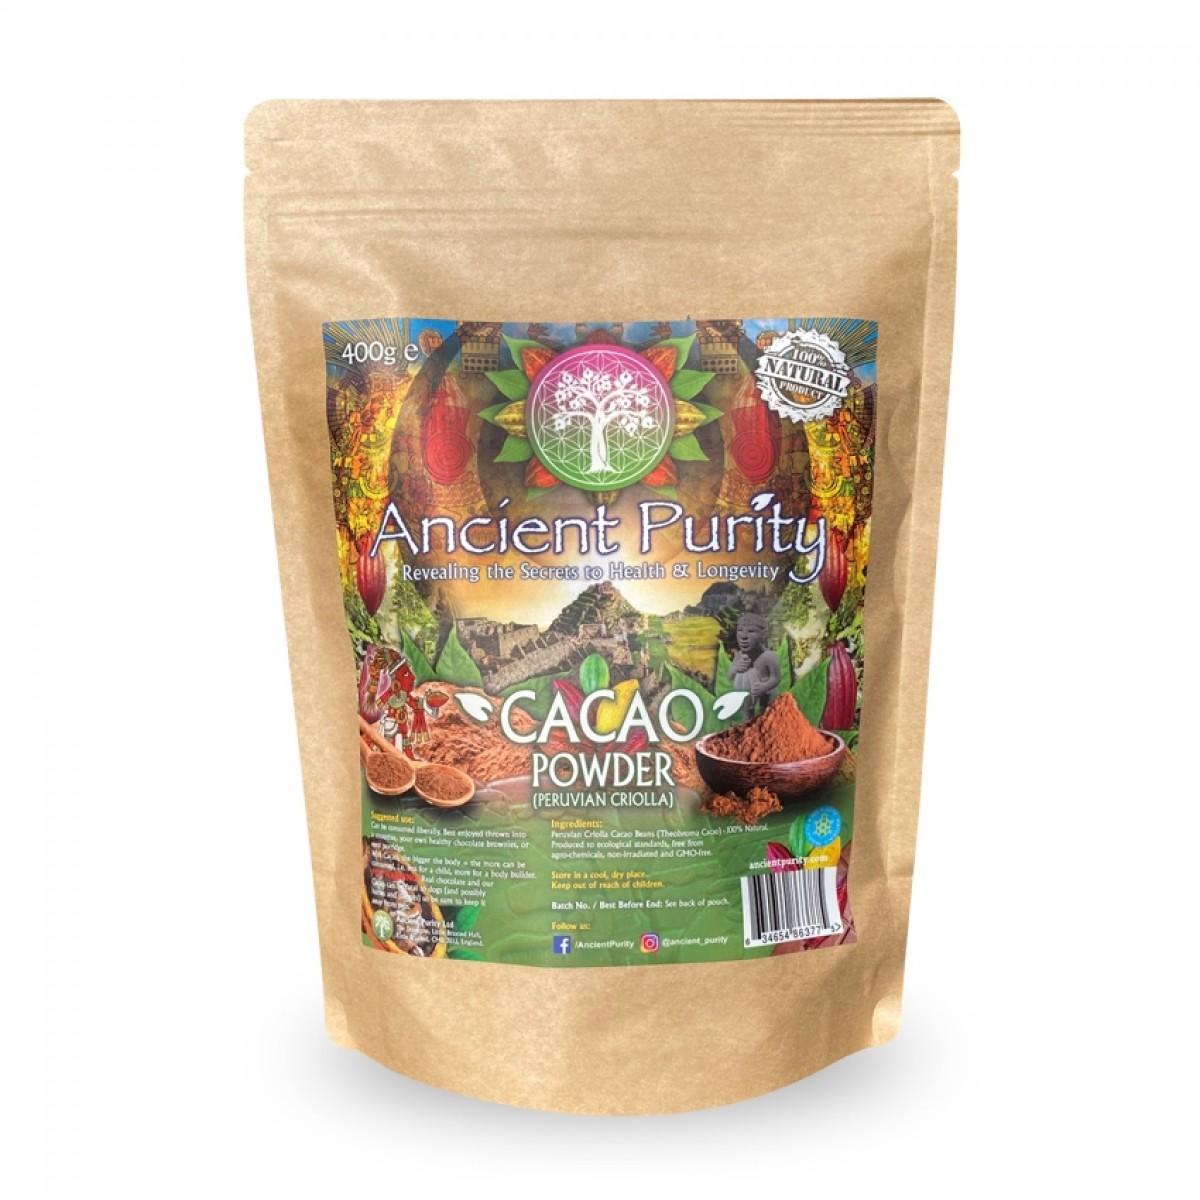 Cacao Powder - 500g (Peruvian Criolla, RAW) - Ancient Purity